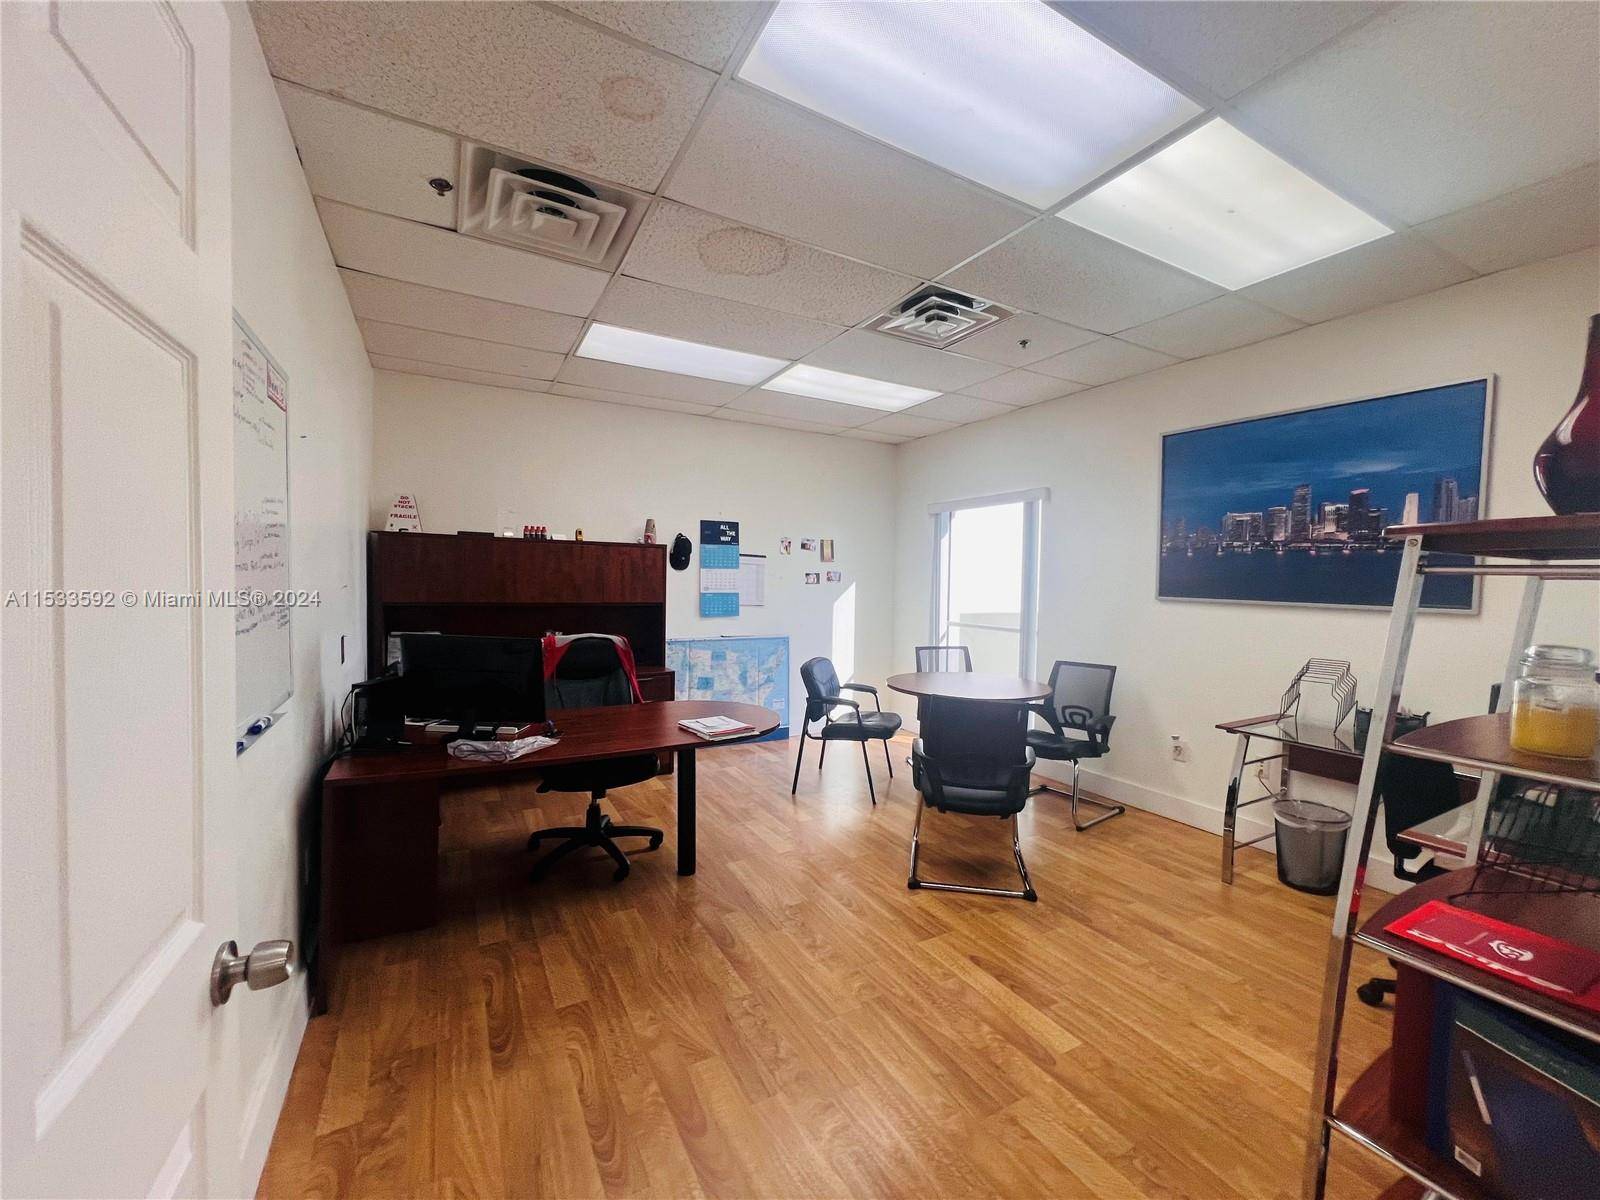 970 SF office space located on the second floor in the Miami Airport Center.